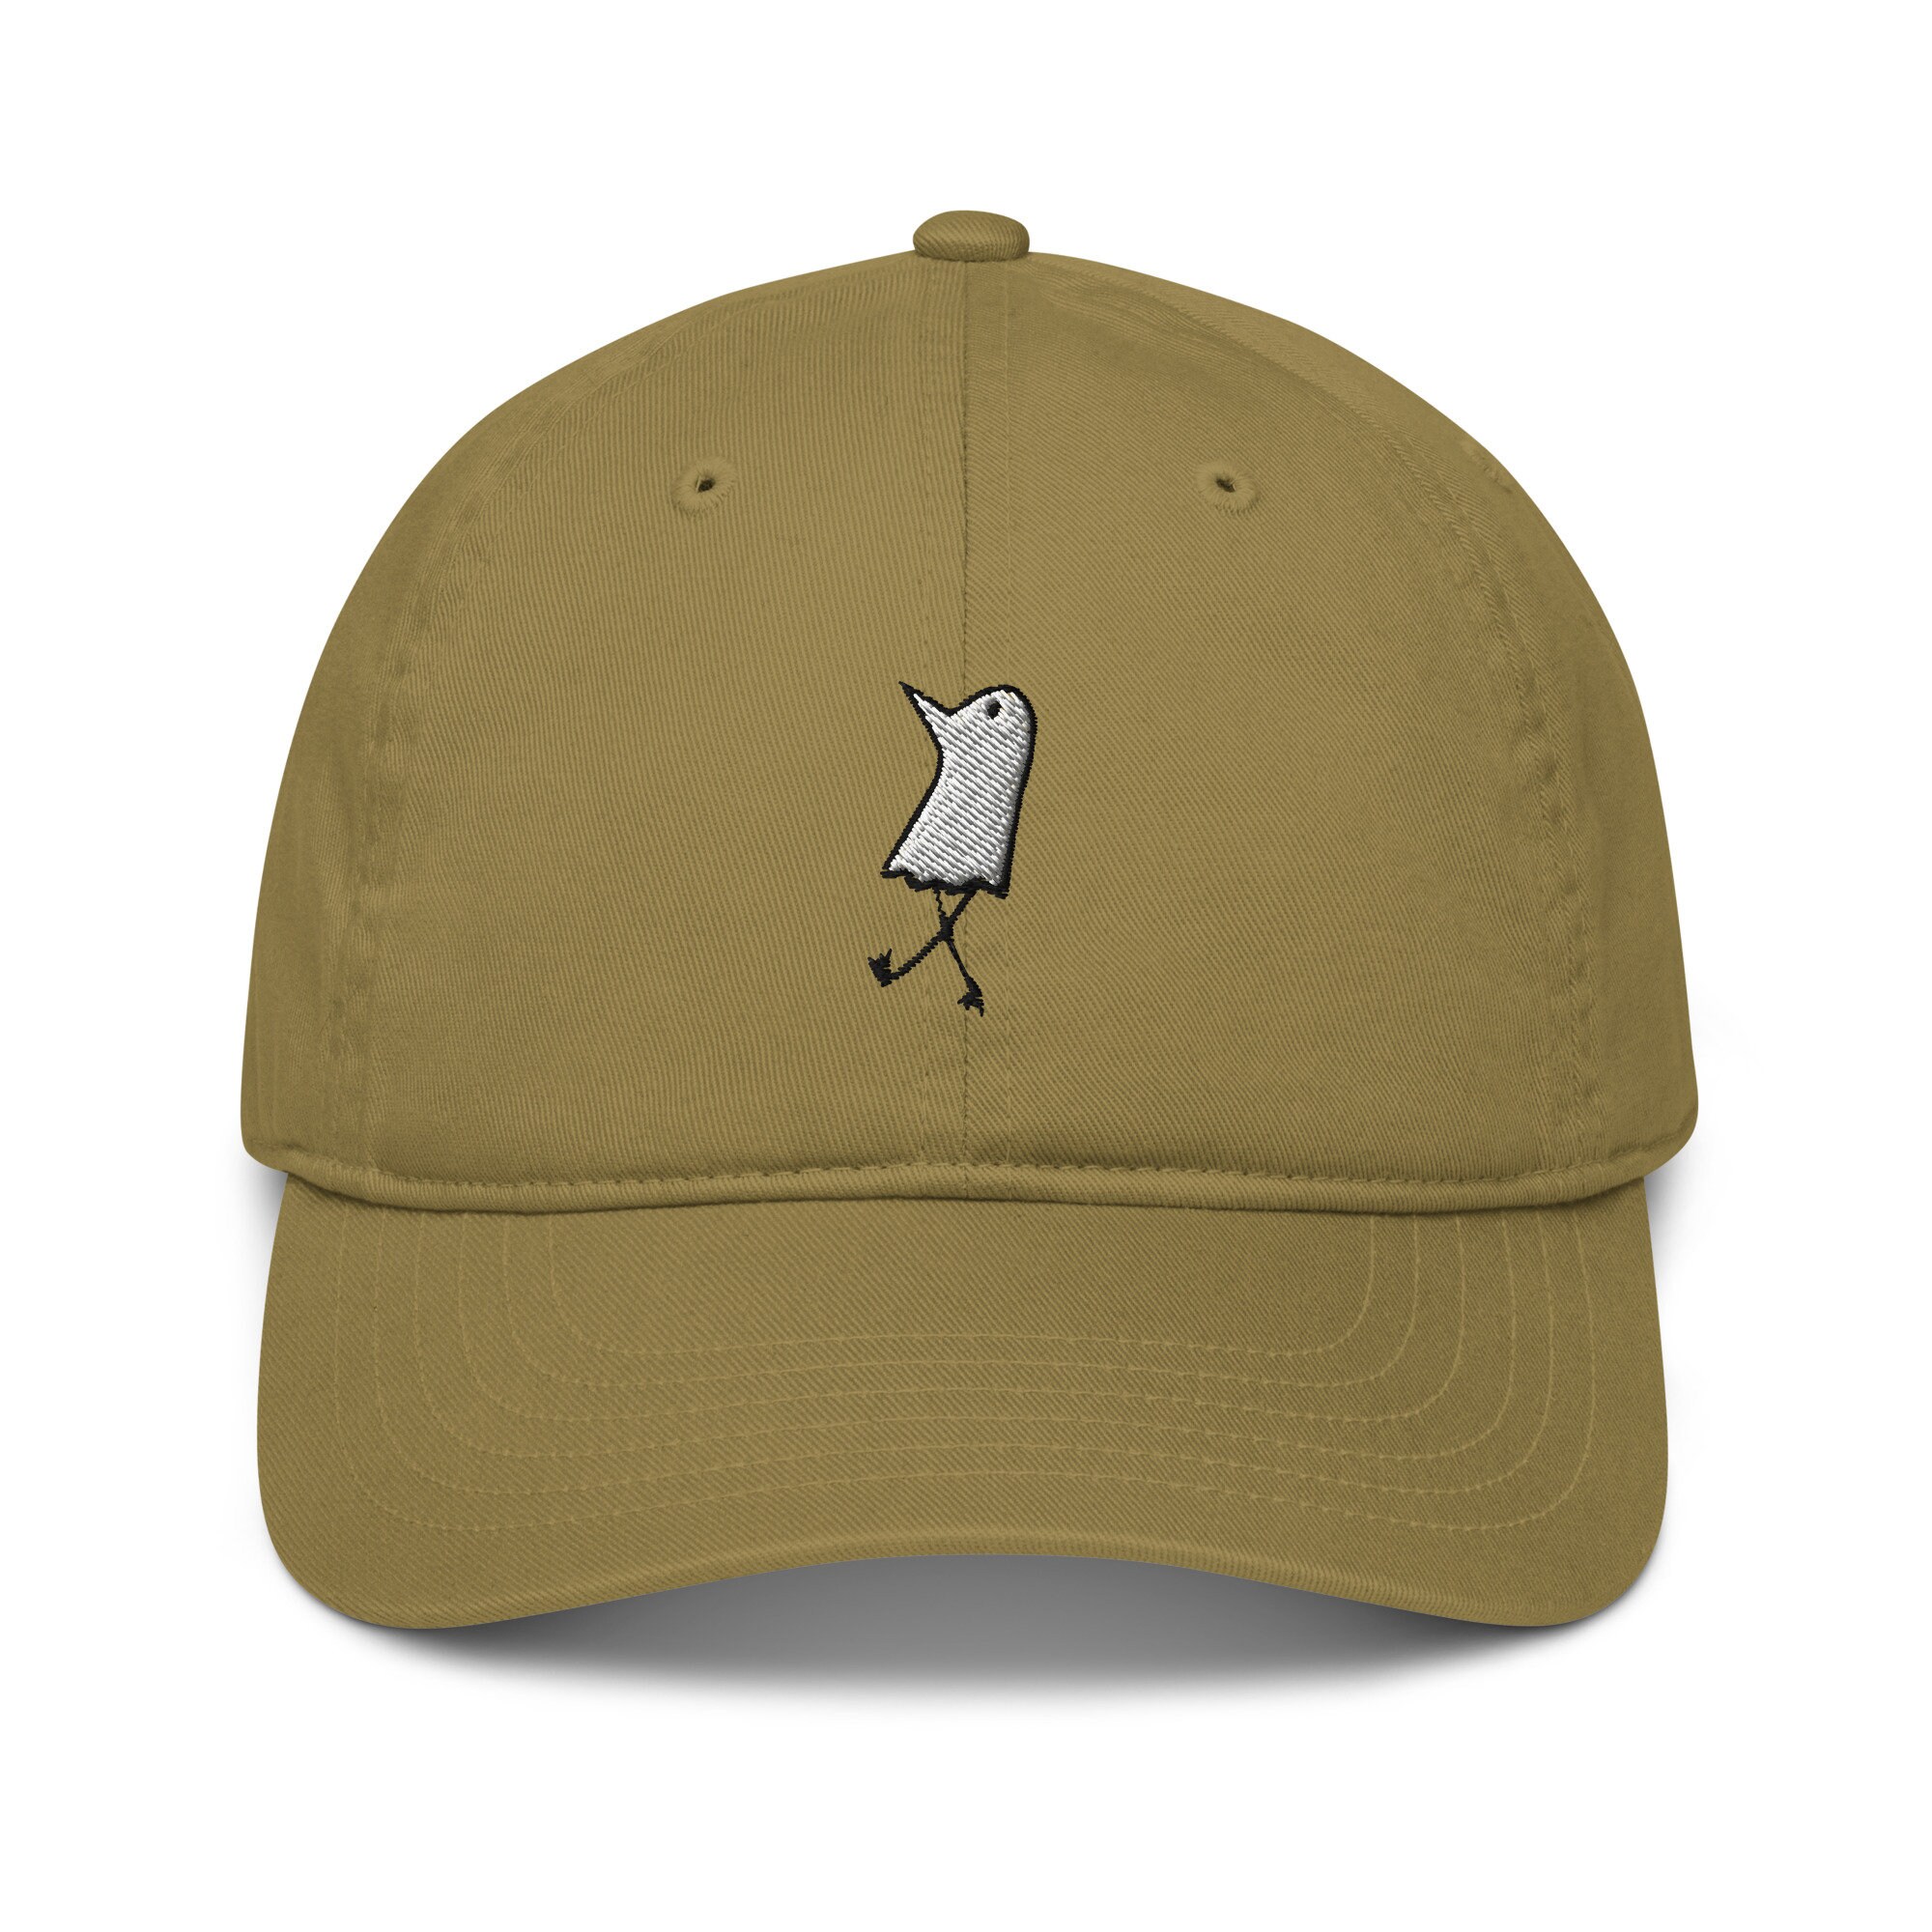 Goodnight Punpun Dad Hat more Colors - Etsy